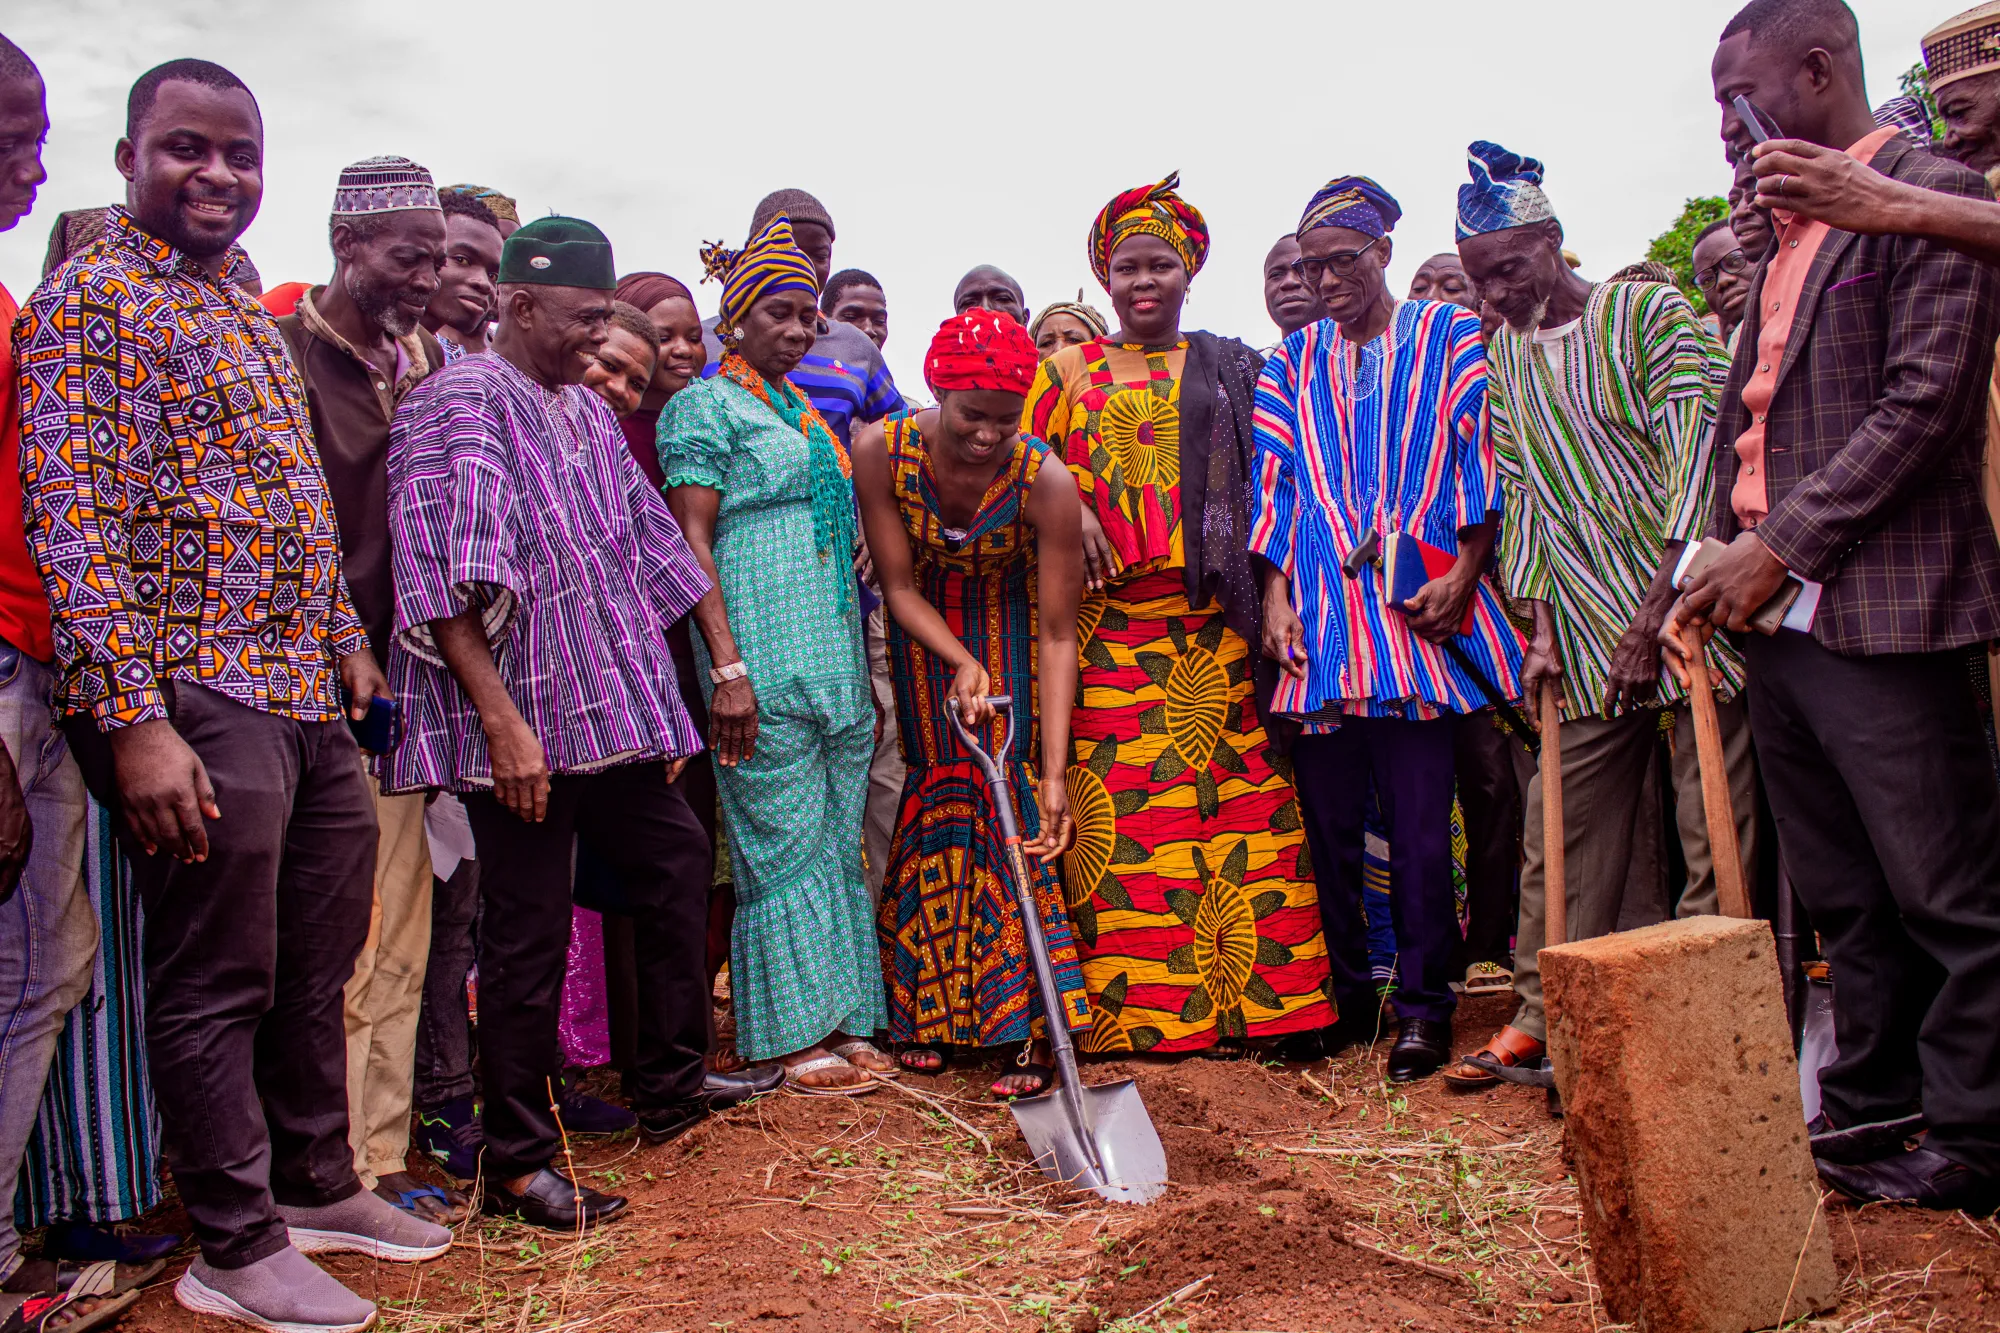 Group of people standing, one of them holding a shovel pointed into the dirt below, breaking ground for the building of the new school.